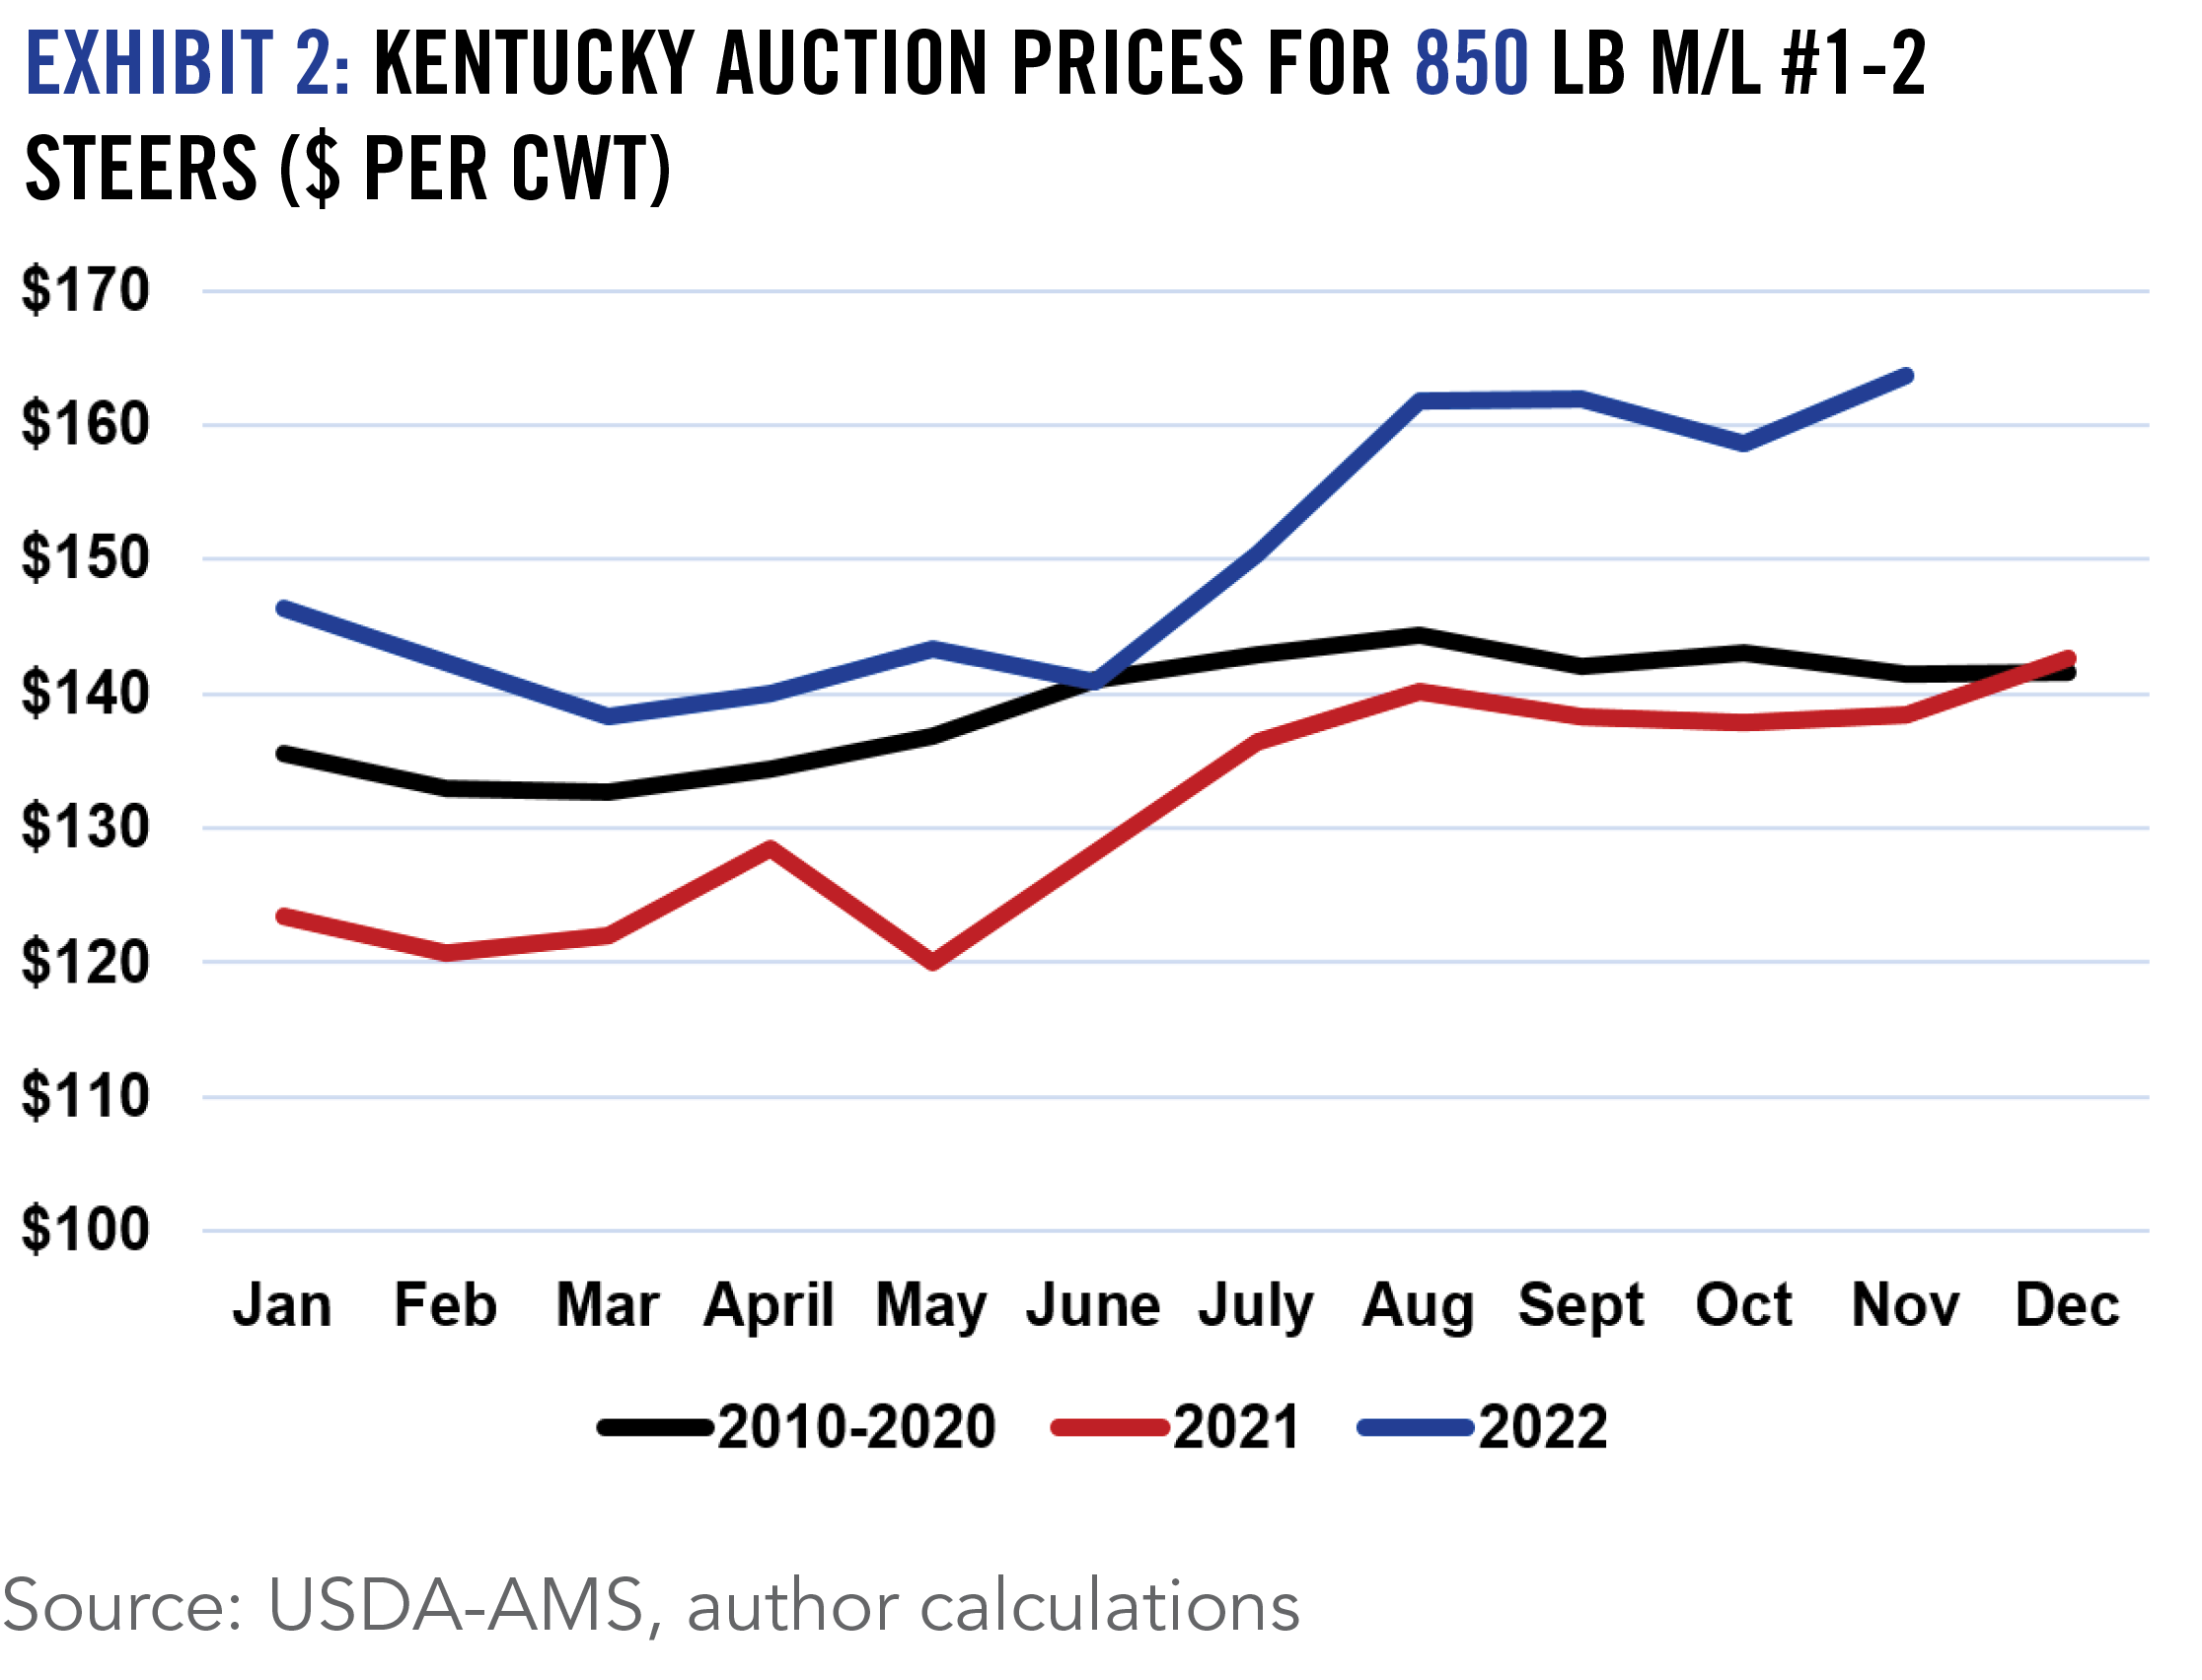 EXHIBIT 2: KENTUCKY AUCTION PRICES FOR 850 LB M/L #1-2 STEERS ($ PER CWT)